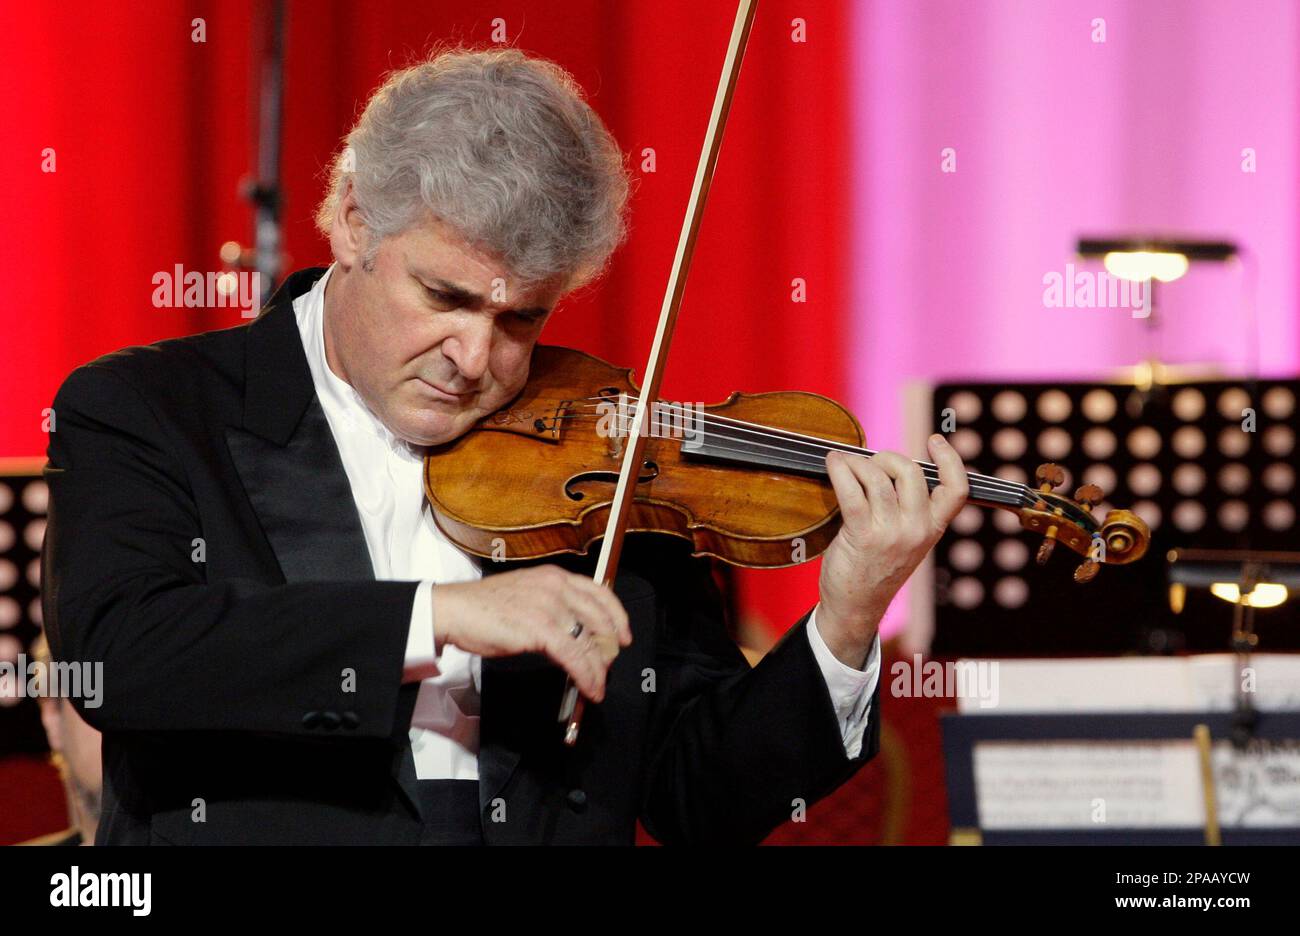 Violinist Pinchas Zuckerman plays a 250 year-old Guarnerius del Gesu violin  during a concert in Pashkov House, Moscow, Friday, March 21, 2008. The  violin, one of the most expensive musical instruments in